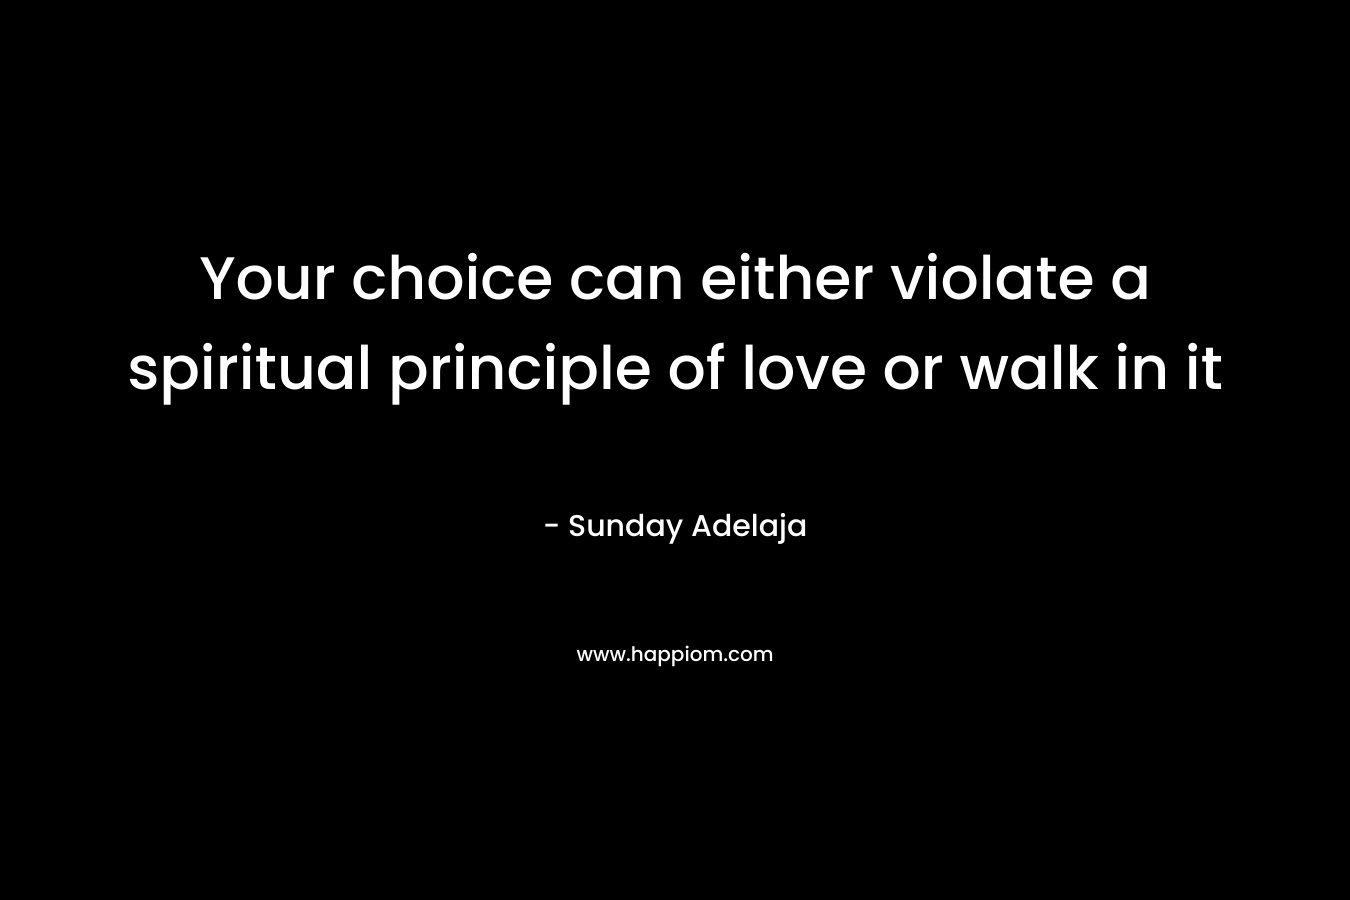 Your choice can either violate a spiritual principle of love or walk in it